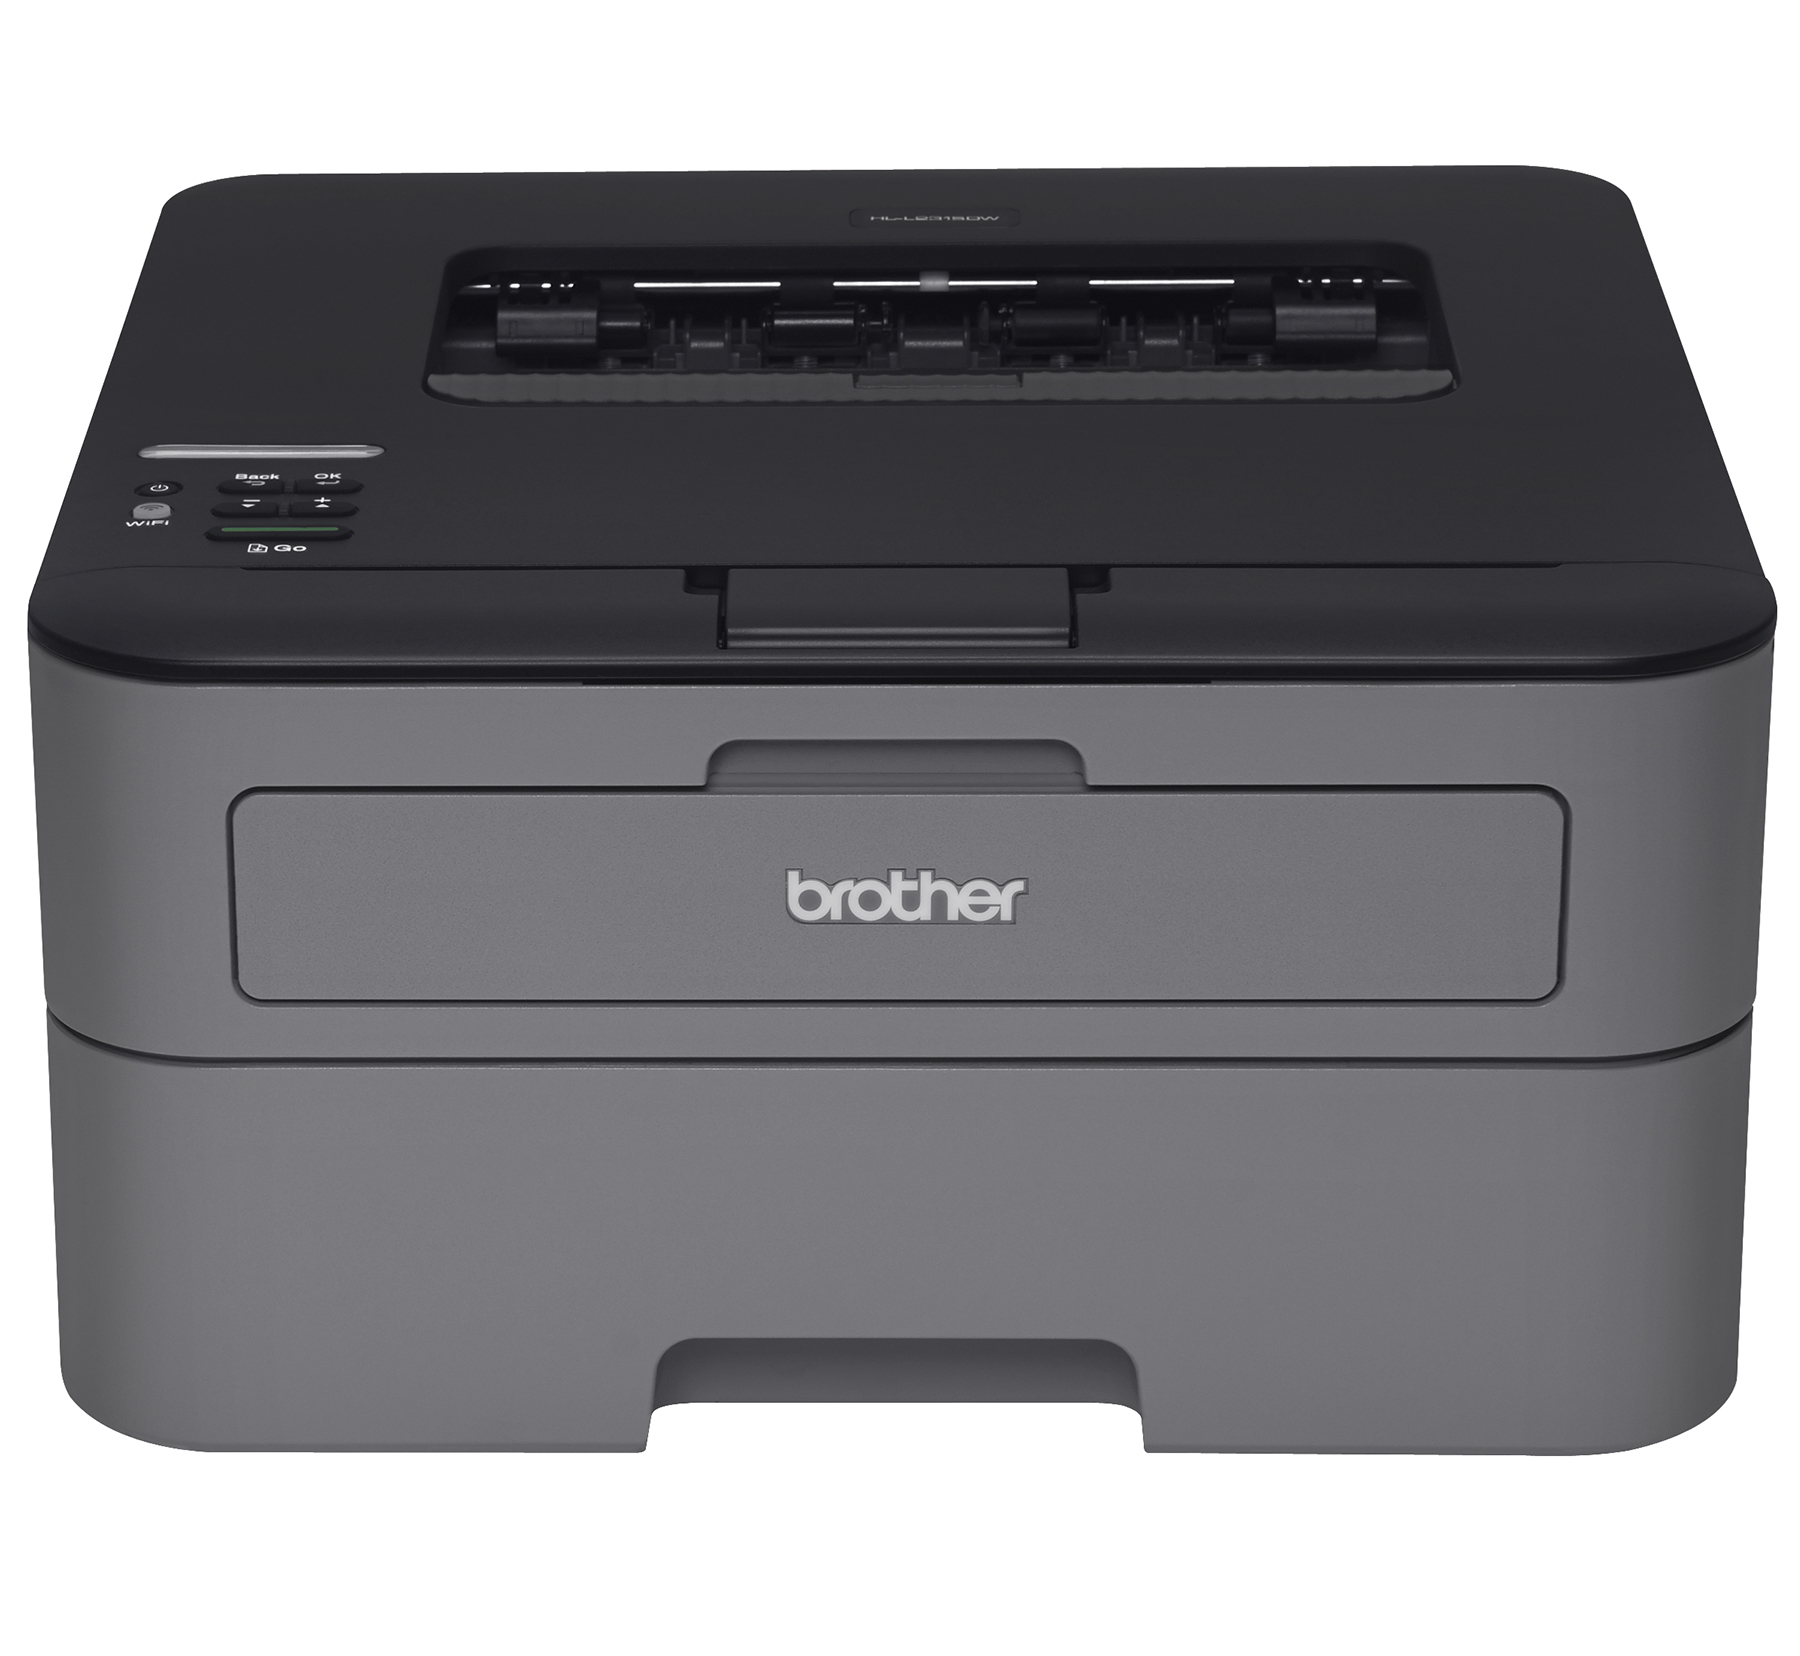 Brother Compact Monochrome Laser Printer, HL-L2315DW, Wireless Printing, Duplex Two-Sided Printing - image 1 of 6